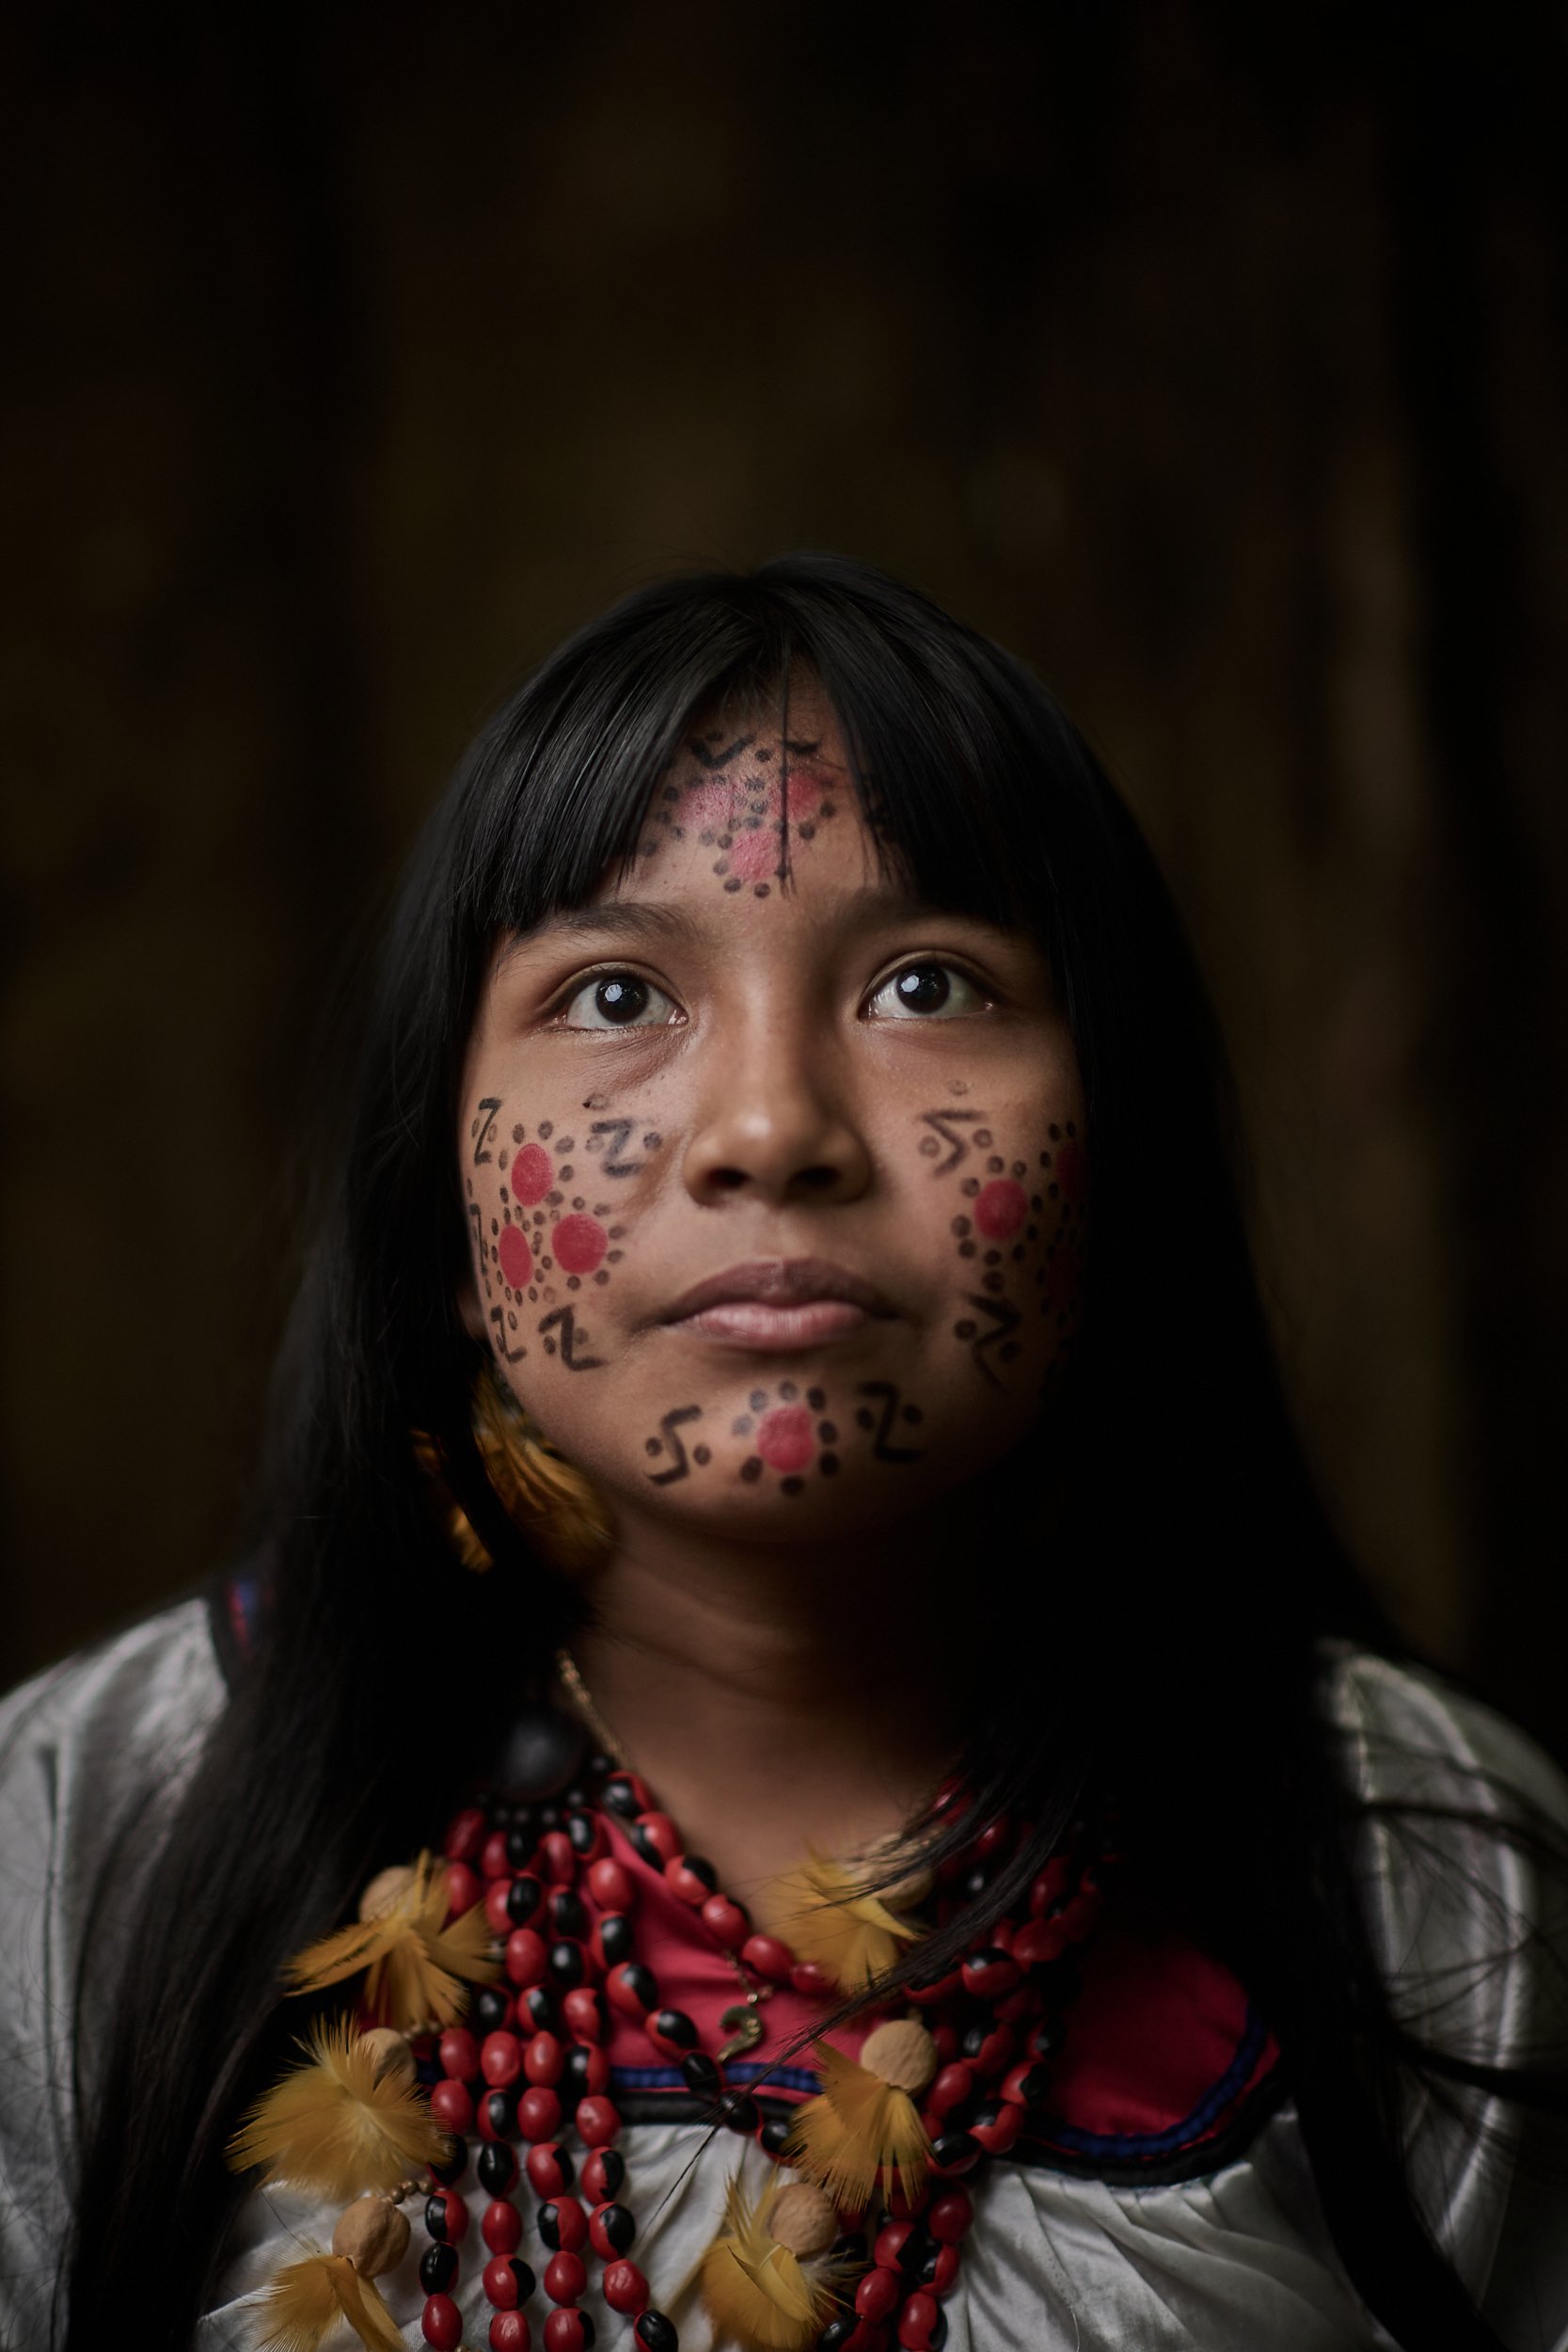 Jhuliana, a young Cofan girl with traditional clothing and face painting